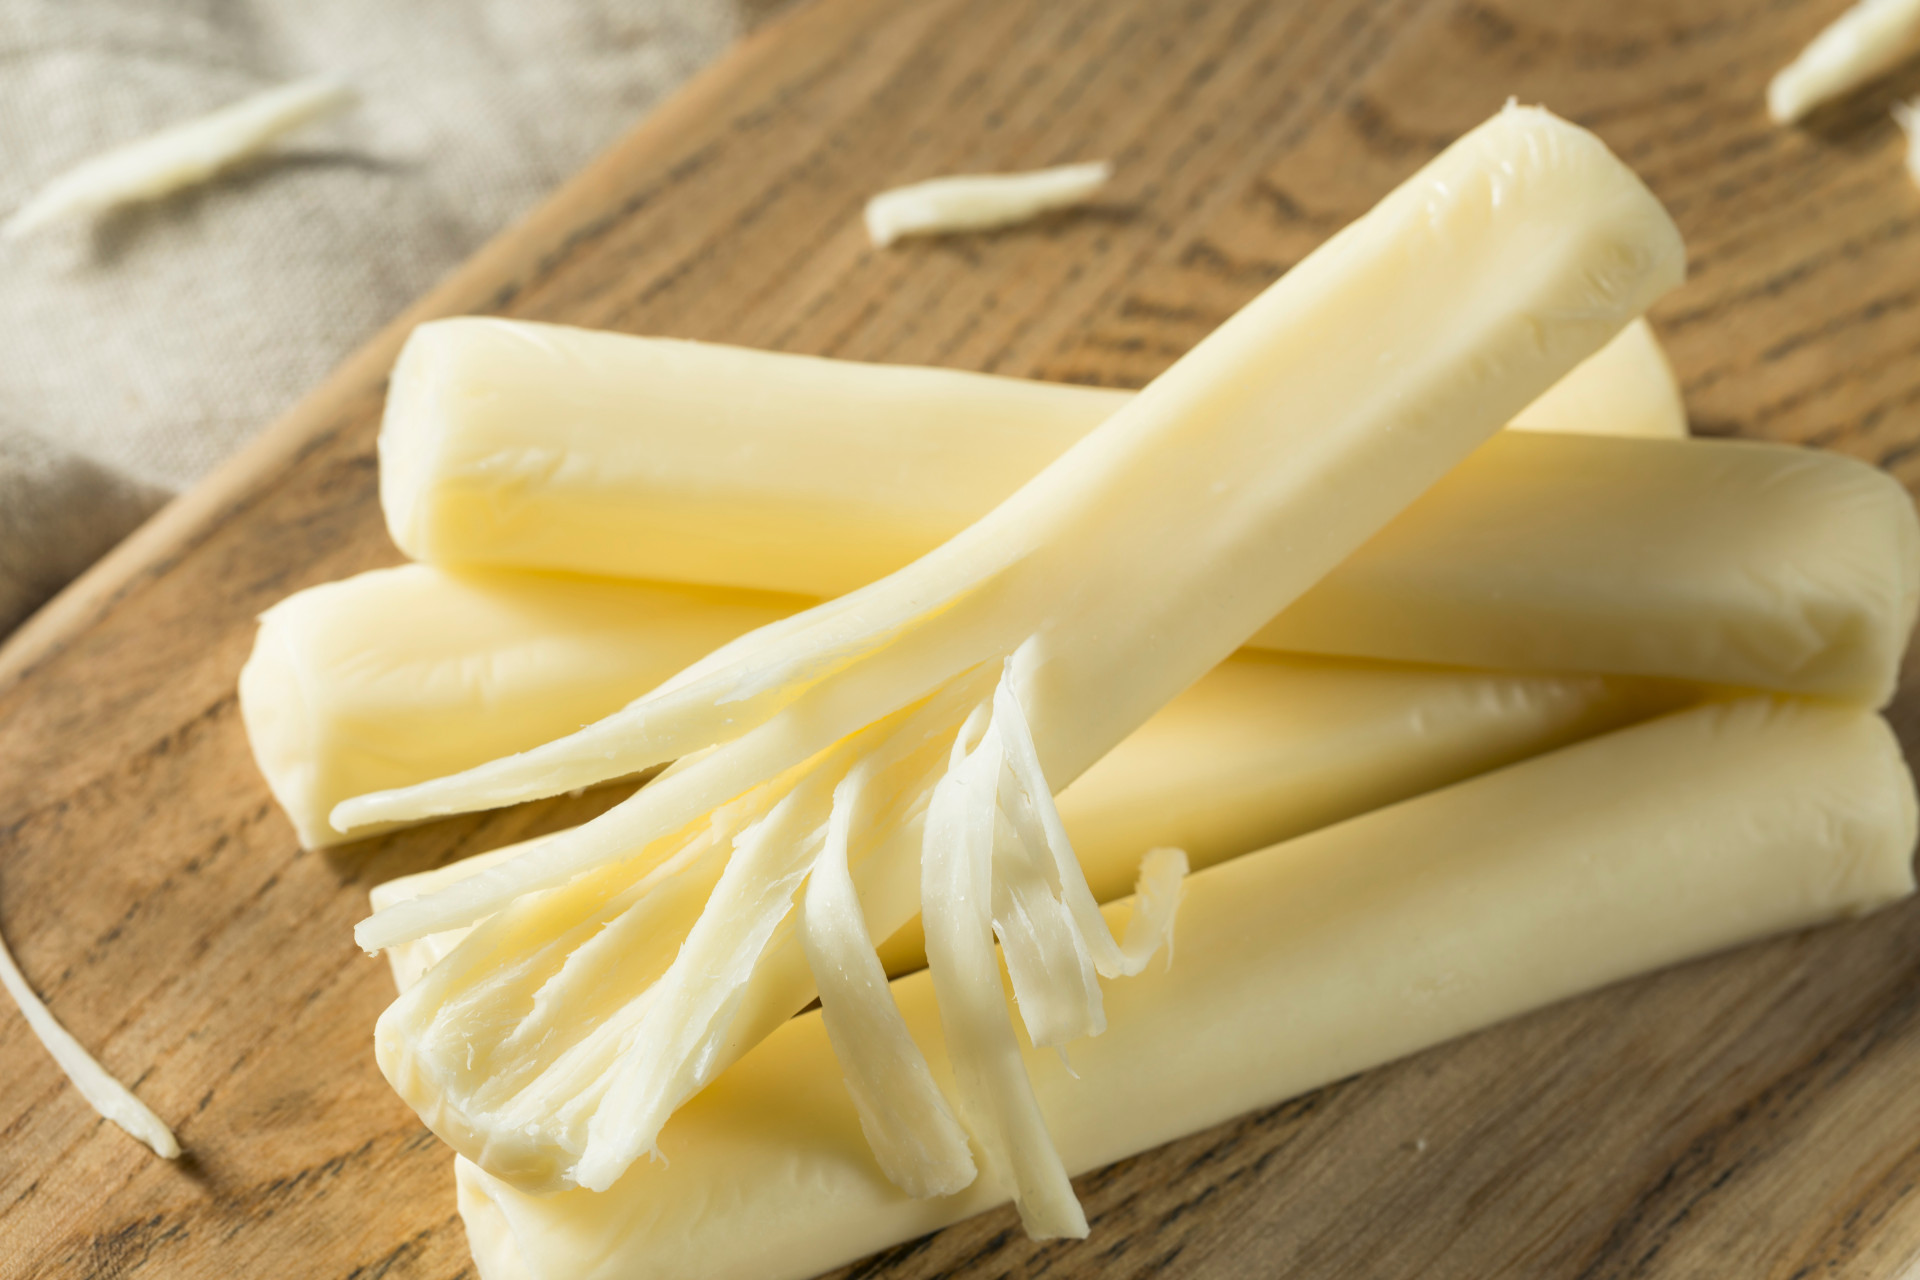 String cheese is a good source of protein that easily fits in a personal bag or carry-on. What's more, it doesn’t smell, which is important when traveling in enclosed spaces.<p><a href="https://www.msn.com/en-us/community/channel/vid-7xx8mnucu55yw63we9va2gwr7uihbxwc68fxqp25x6tg4ftibpra?cvid=94631541bc0f4f89bfd59158d696ad7e">Follow us and access great exclusive content every day</a></p>